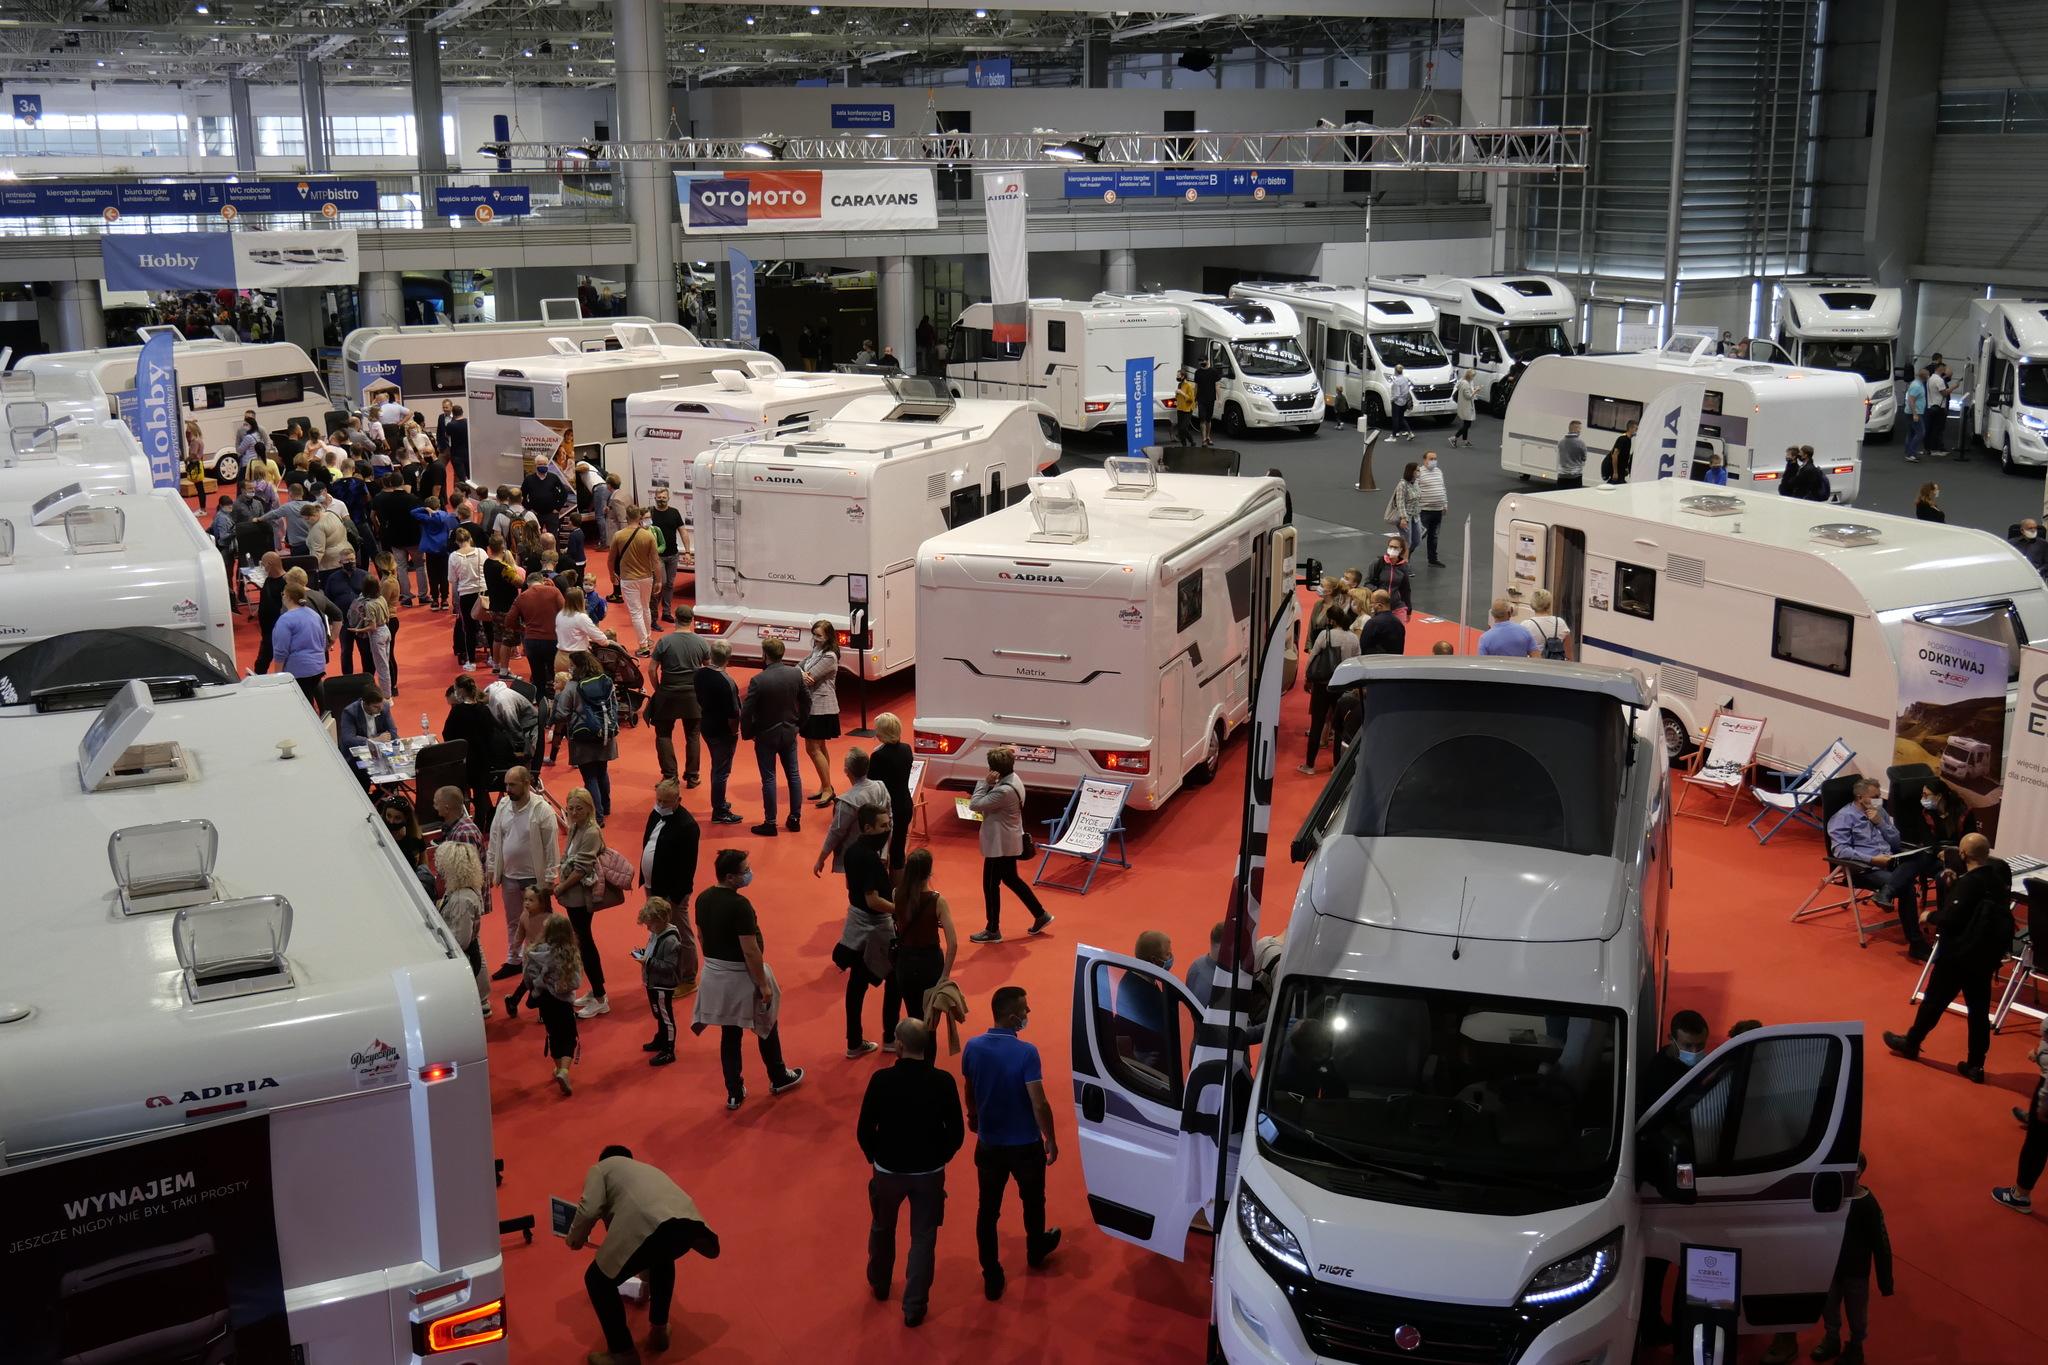 A weekend with motorhomes and more. The 4th edition of Caravans Salon Poland in Poznań will take place on September 24-26 – image 4